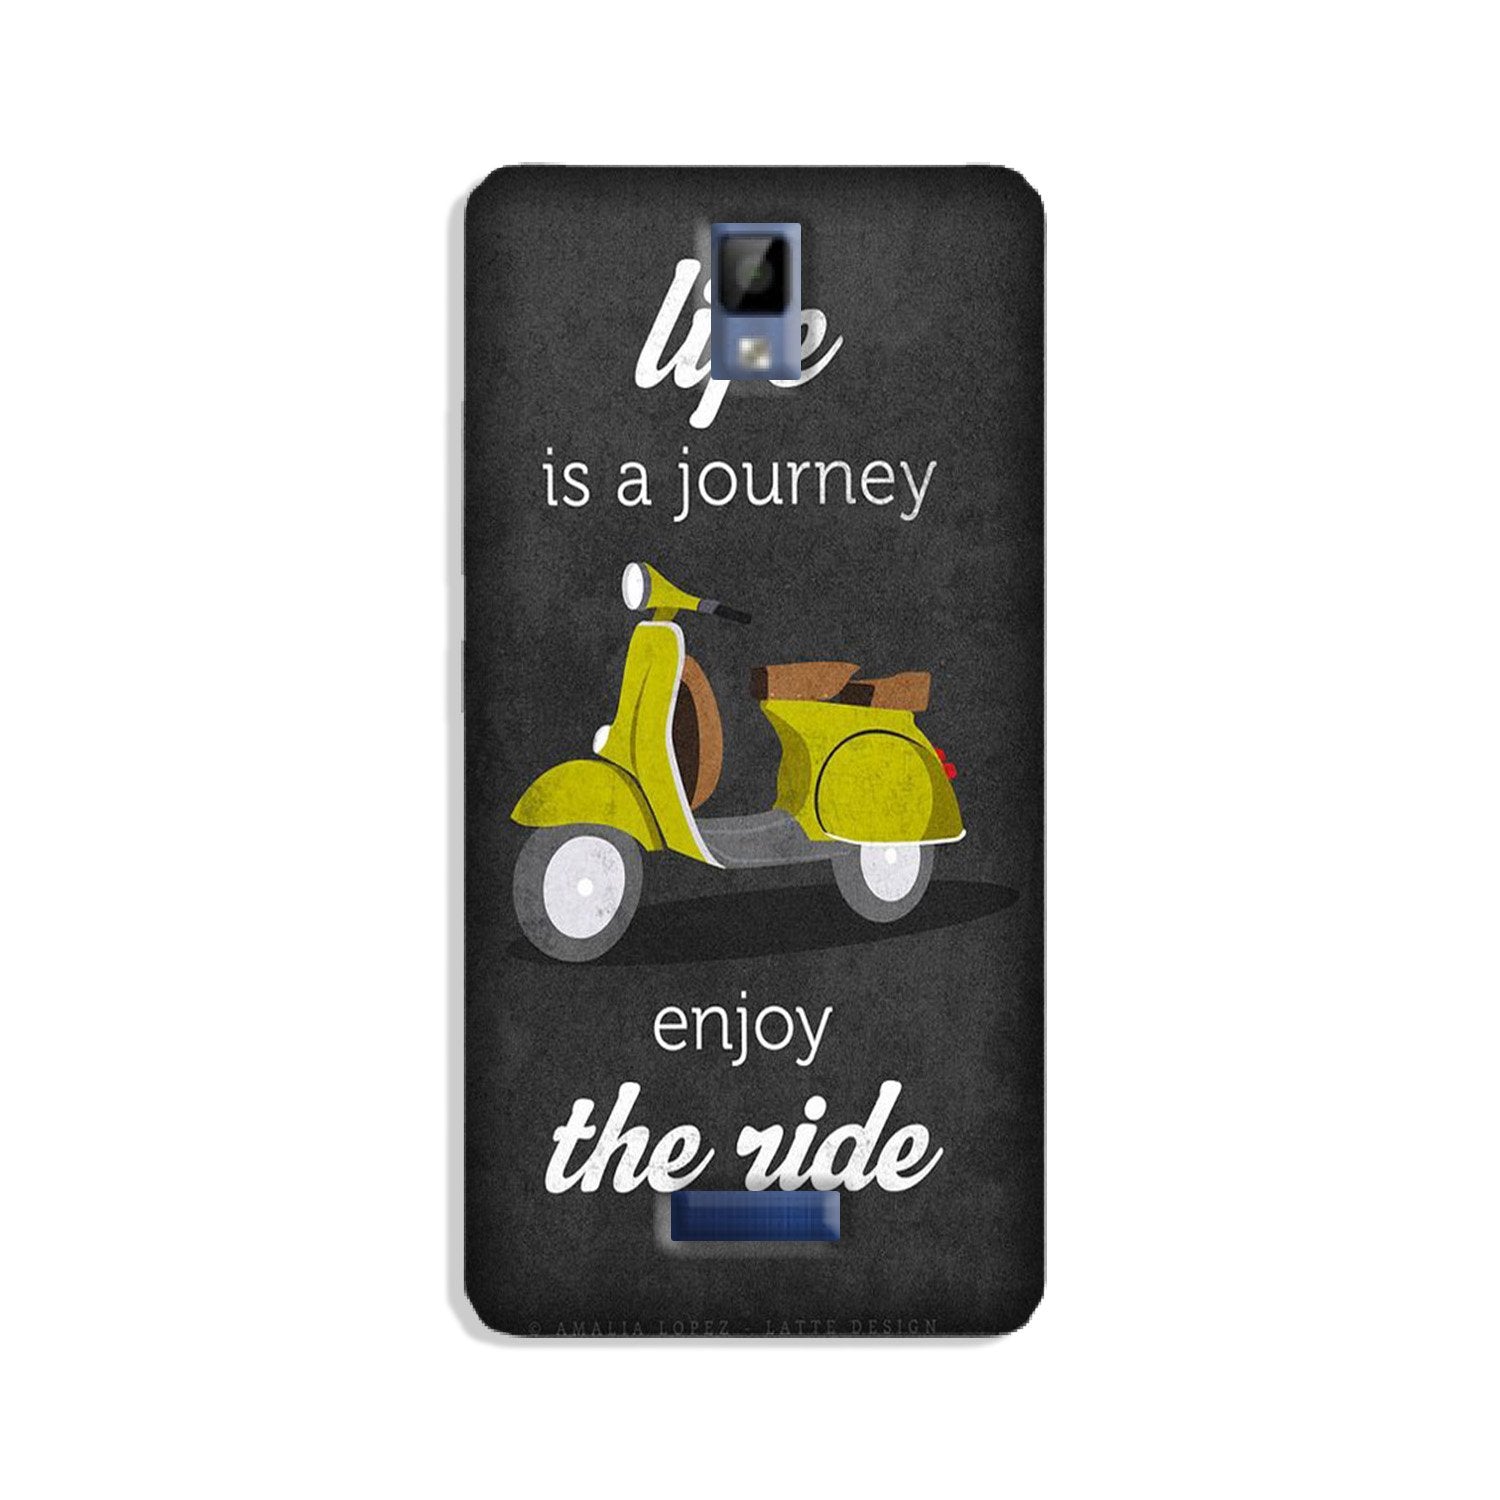 Life is a Journey Case for Gionee P7 (Design No. 261)